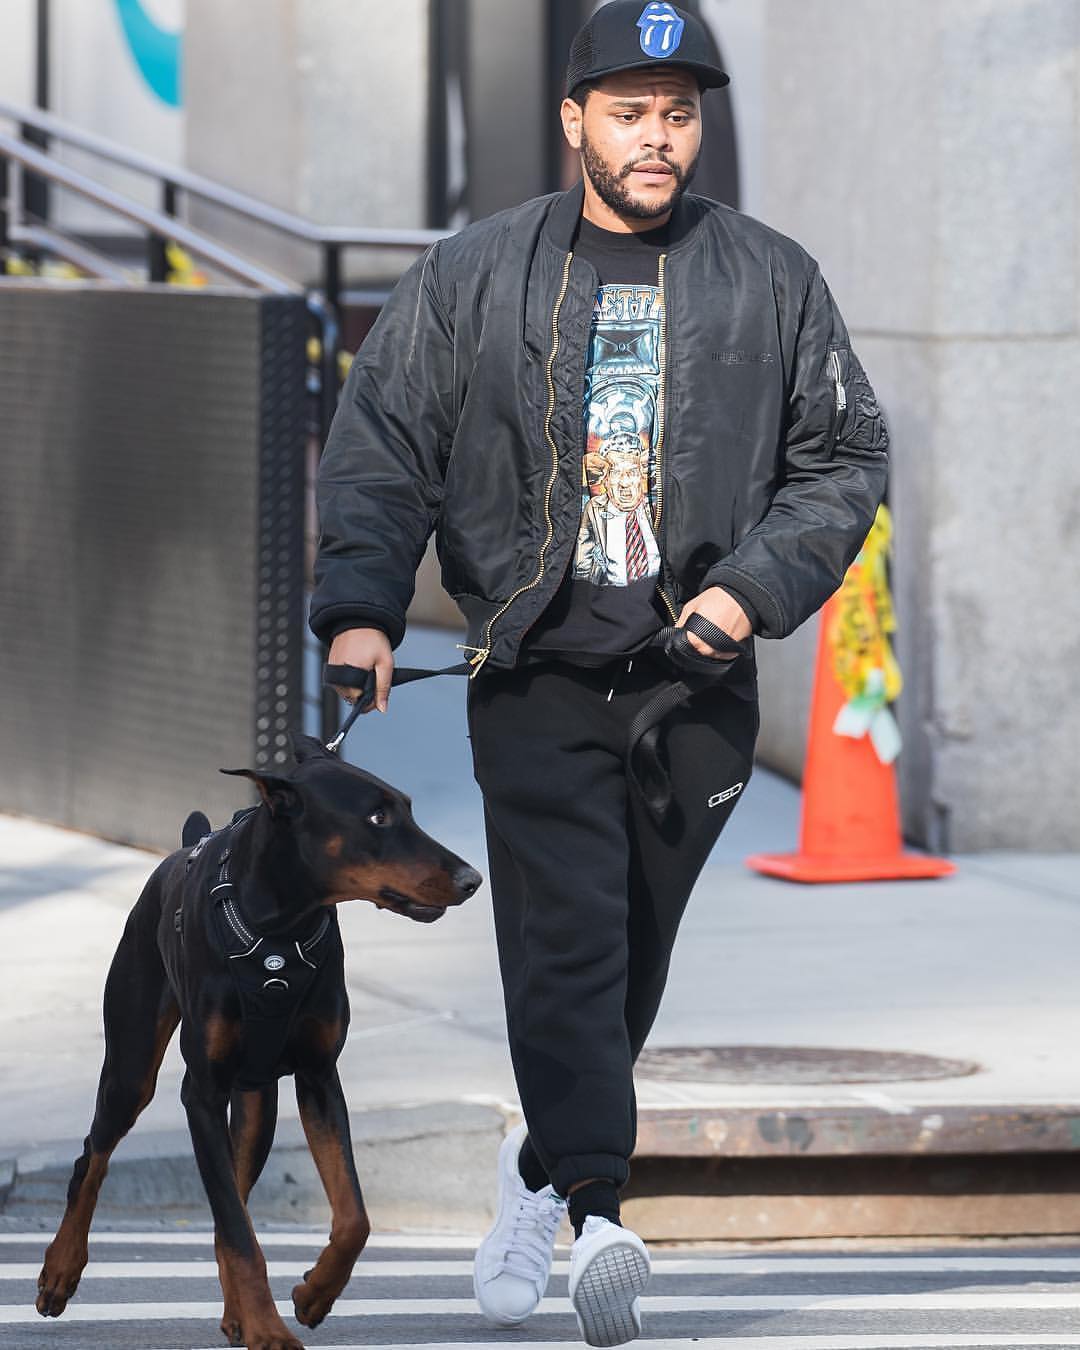 SPOTTED: The Weeknd Wears Puma in New York City